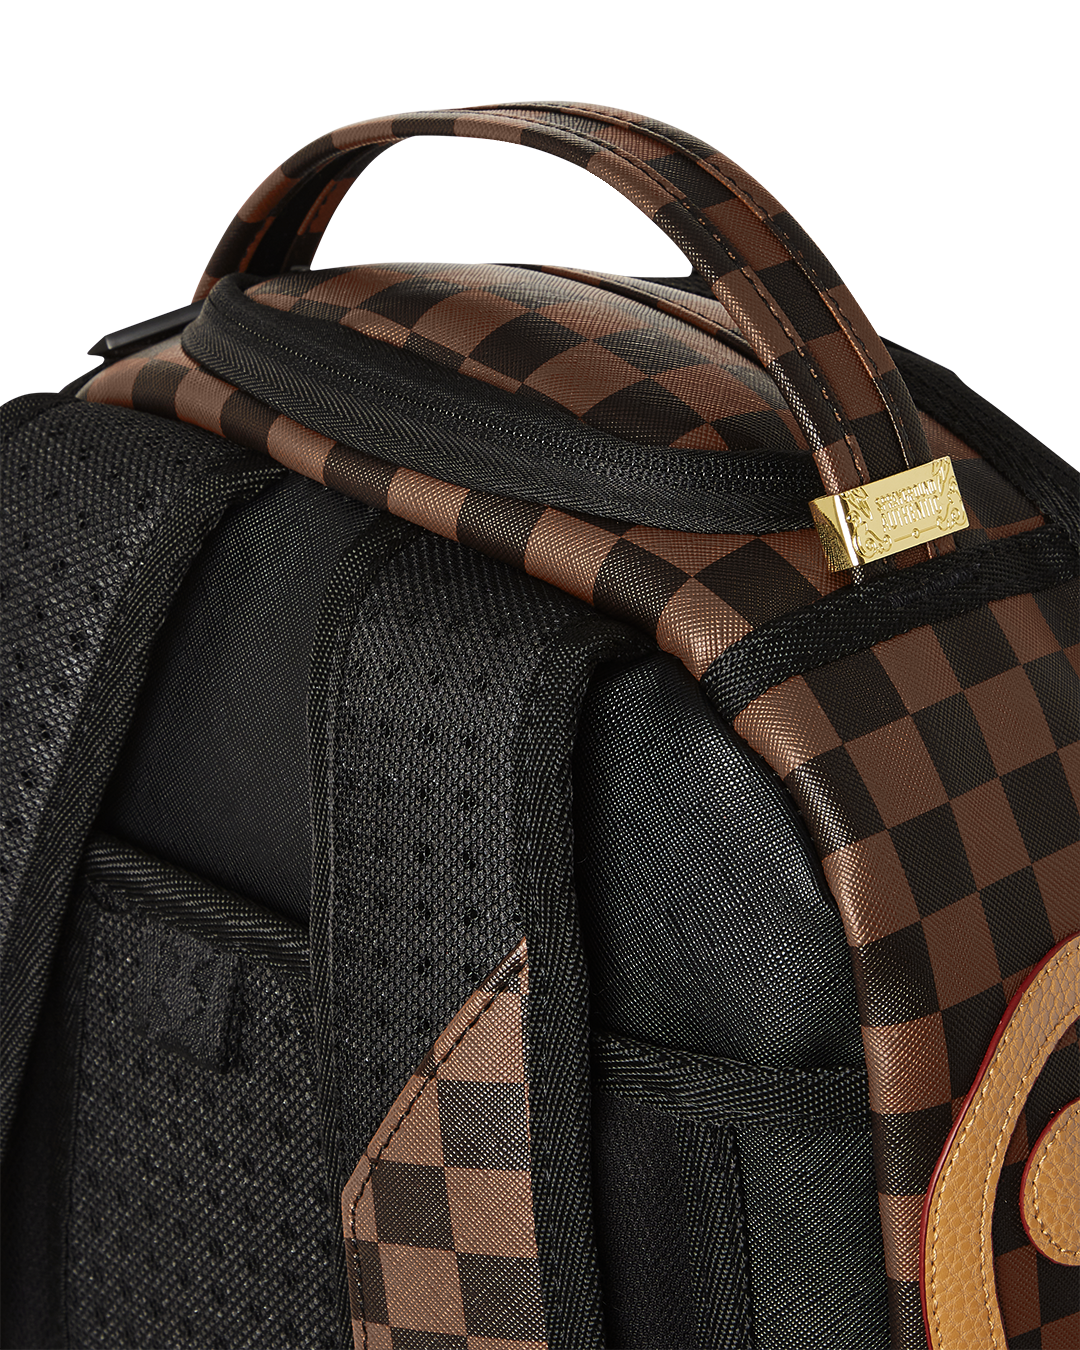 Sprayground Limited Edition Henny B Backpack for Sale in Los